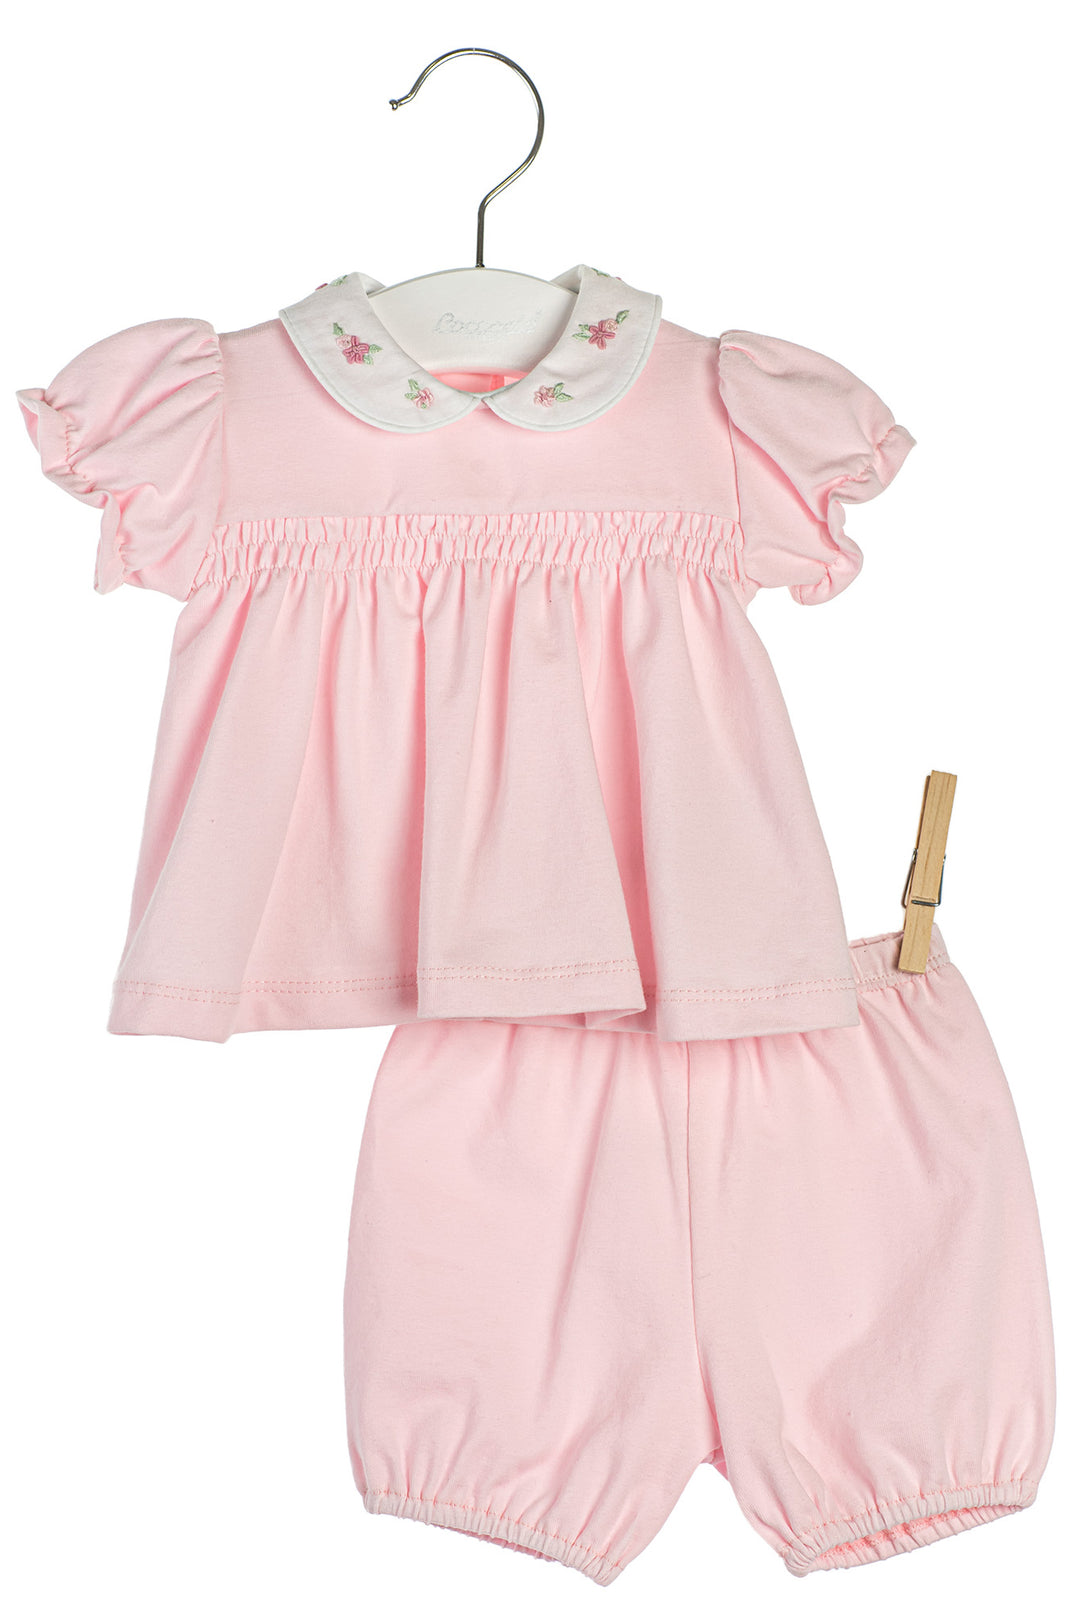 Coccodè "Saskia" Pink Embroidered Top & Bloomers | Millie and John